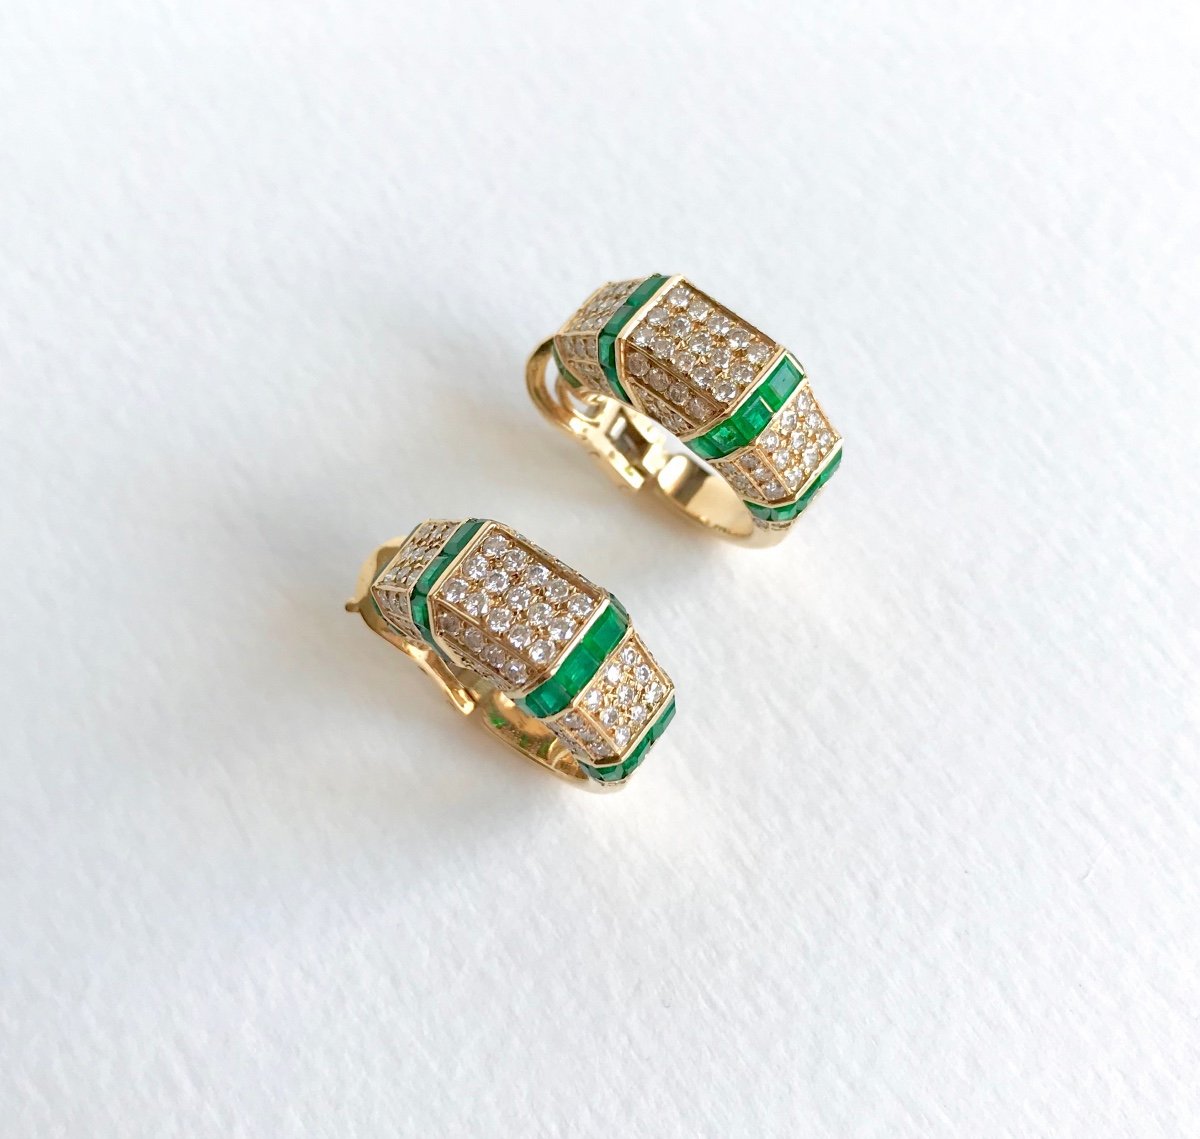 Piaget Earrings In 18 Kt Yellow Gold Diamonds And Emeralds.-photo-4